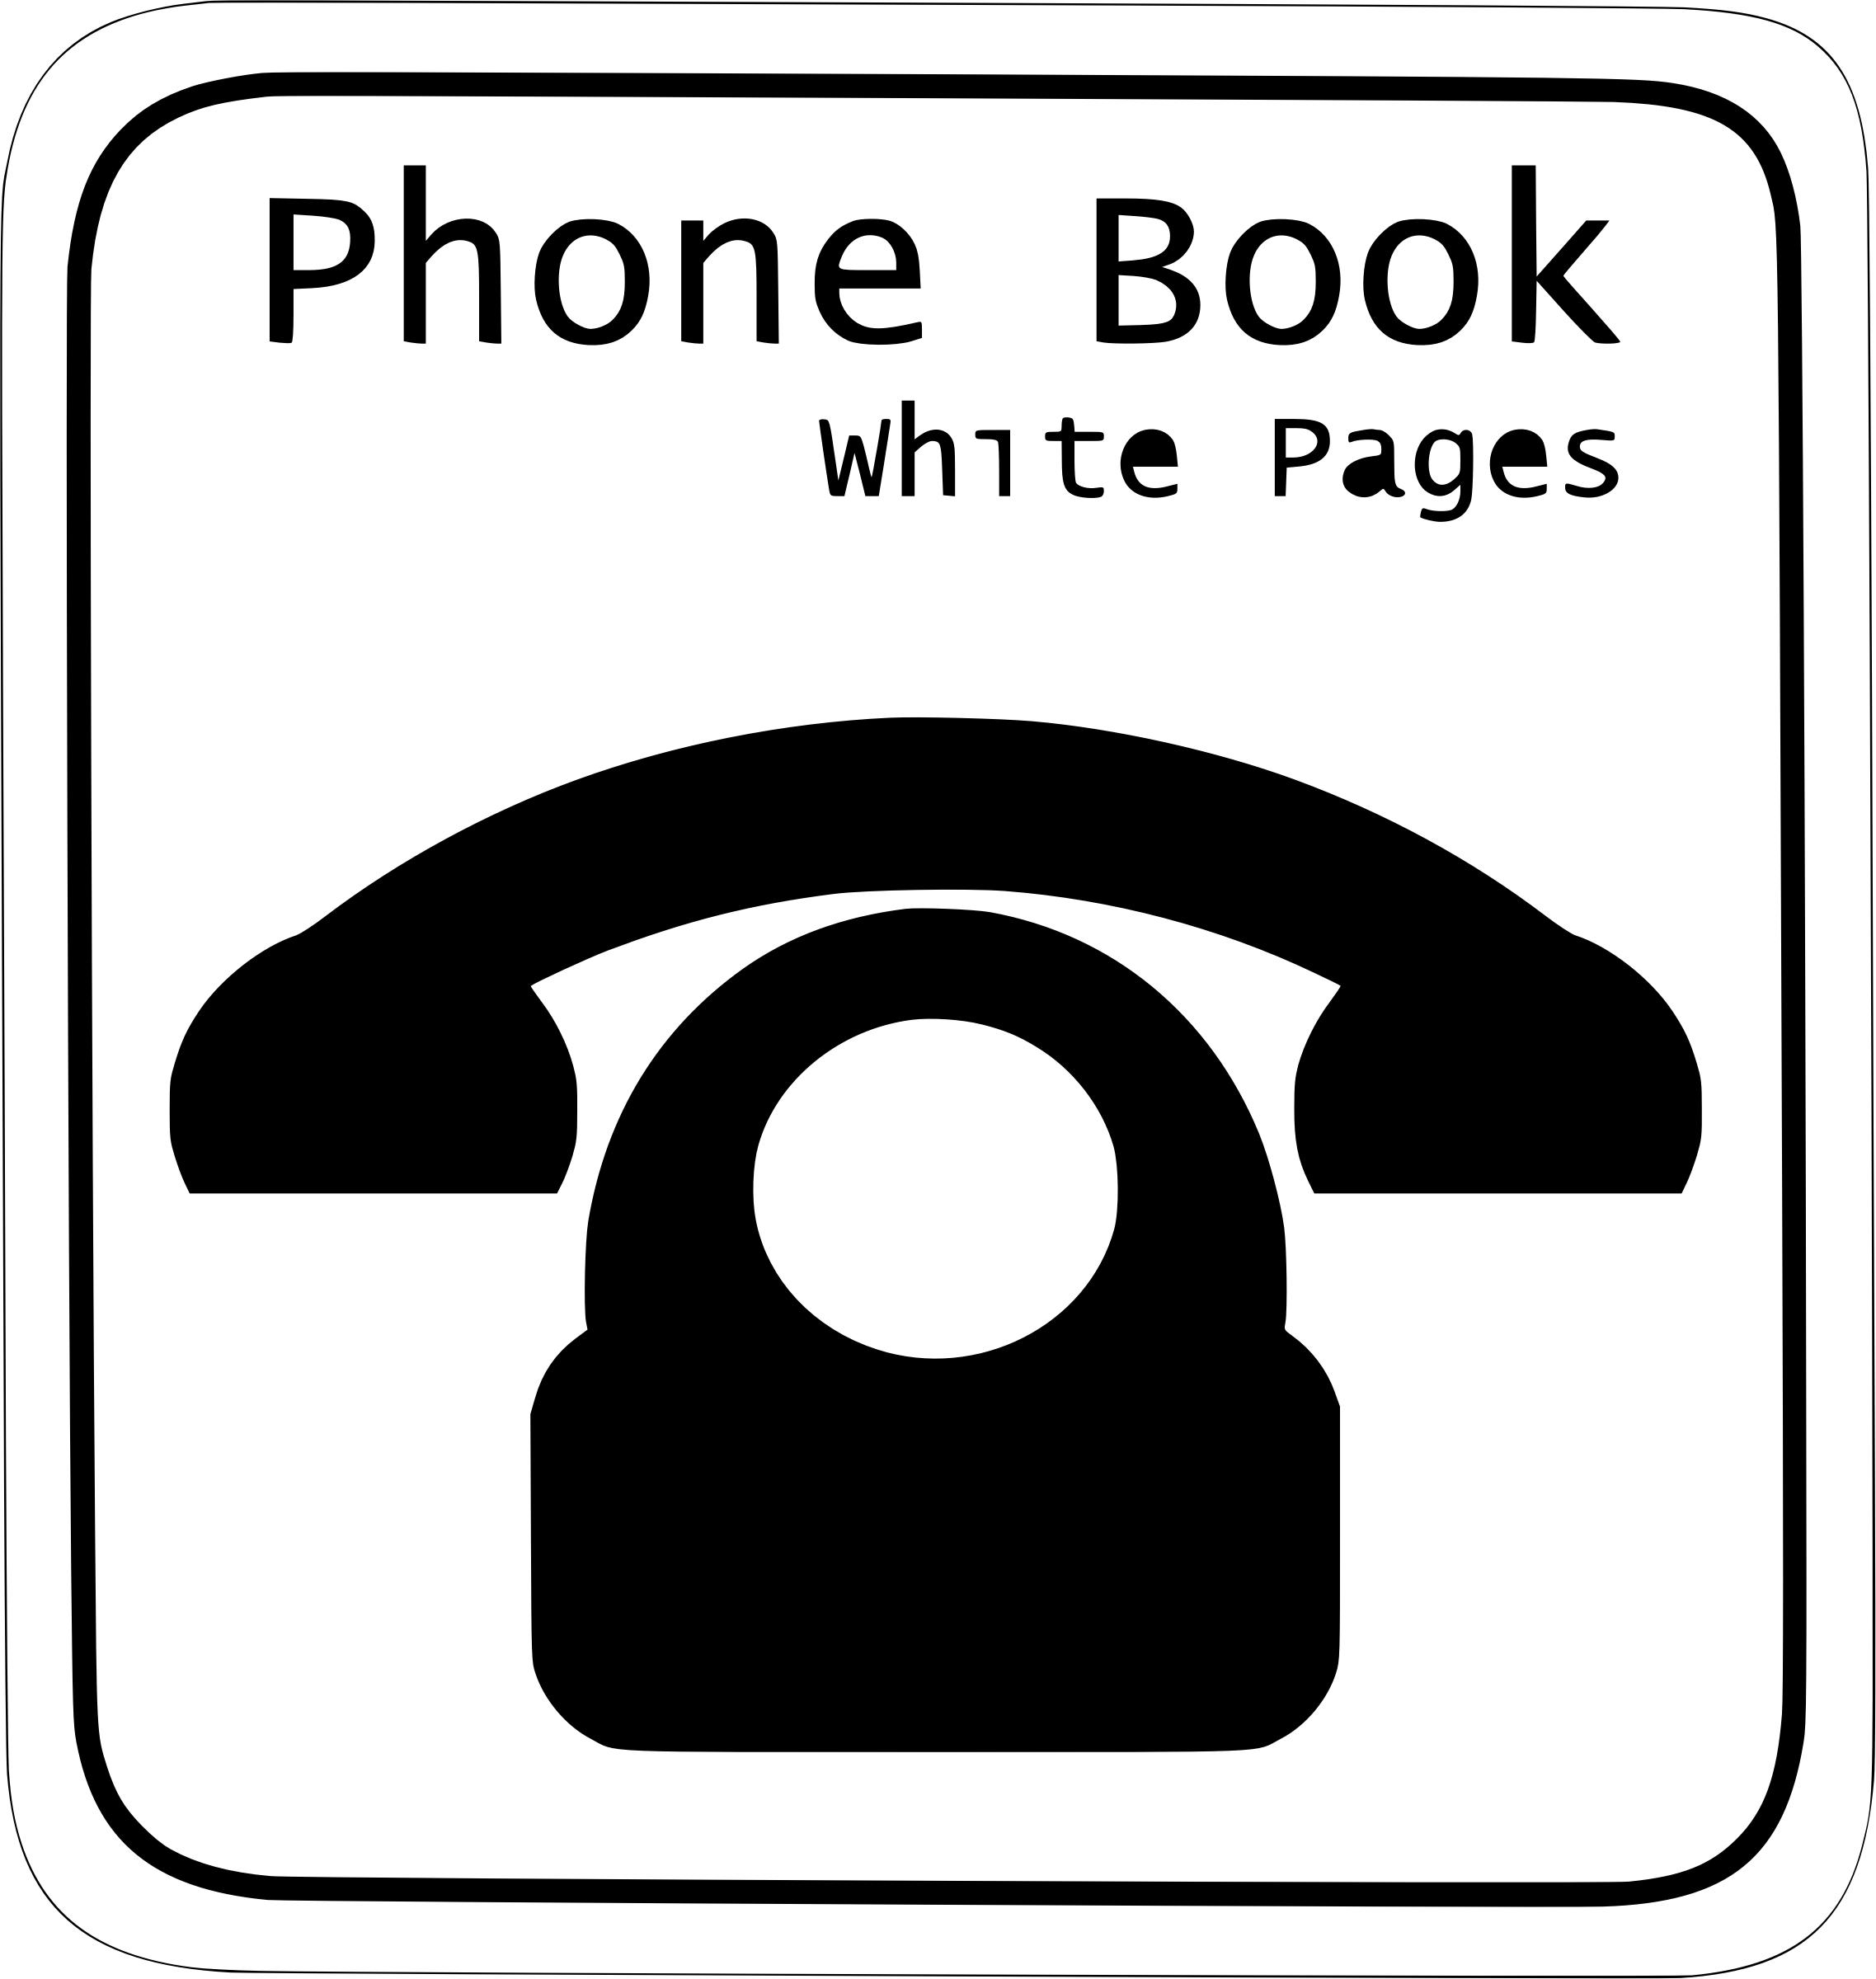 white pages phone book png